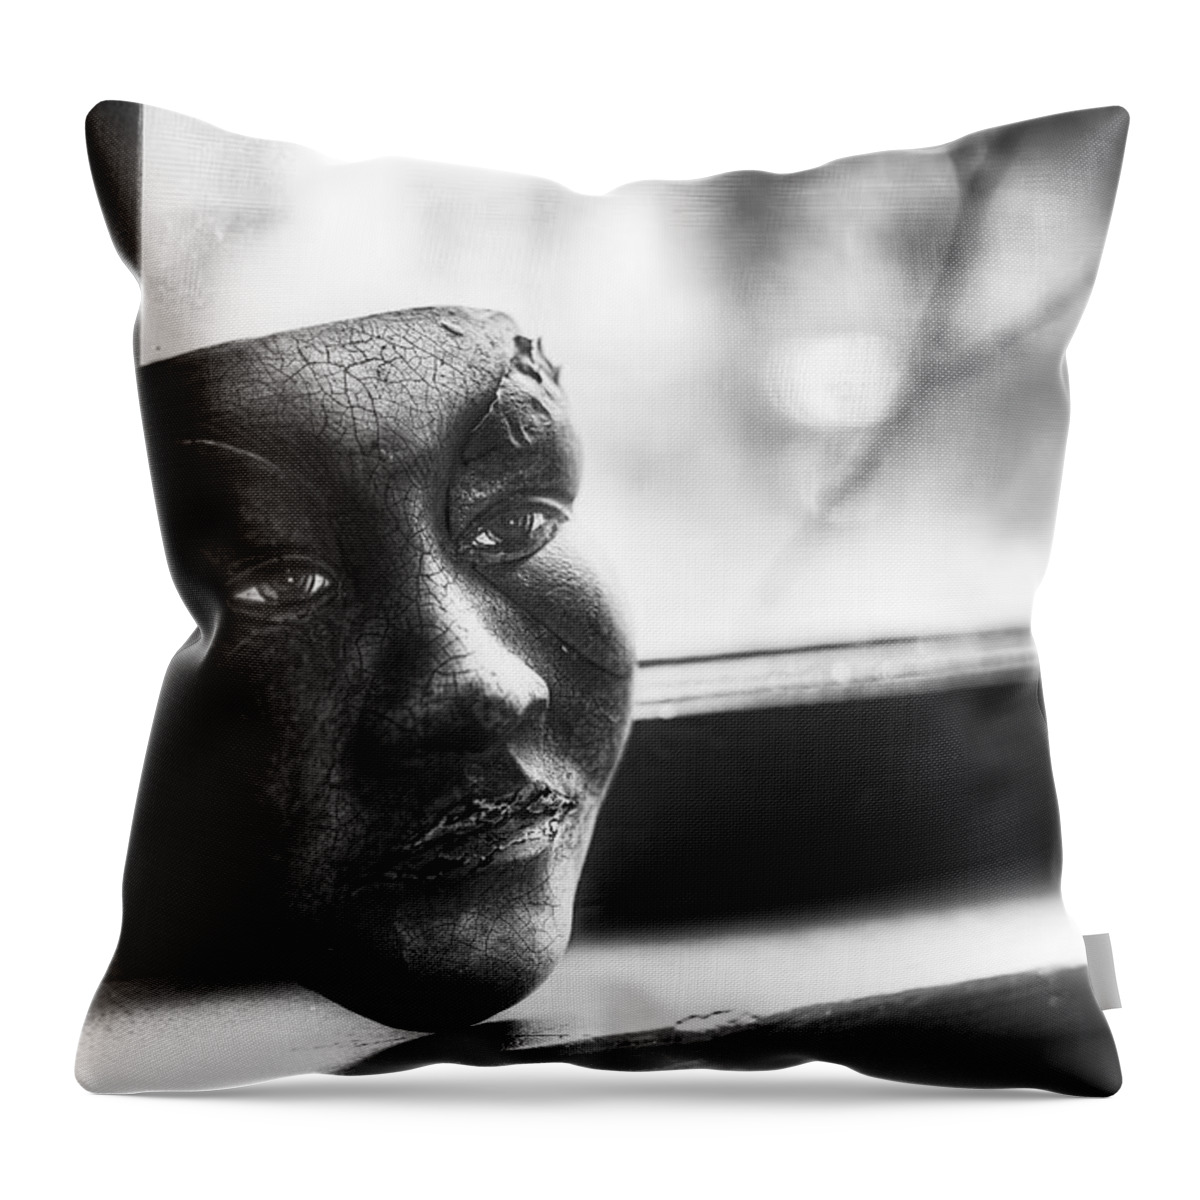 Black And White Throw Pillow featuring the photograph The Mask by Scott Norris